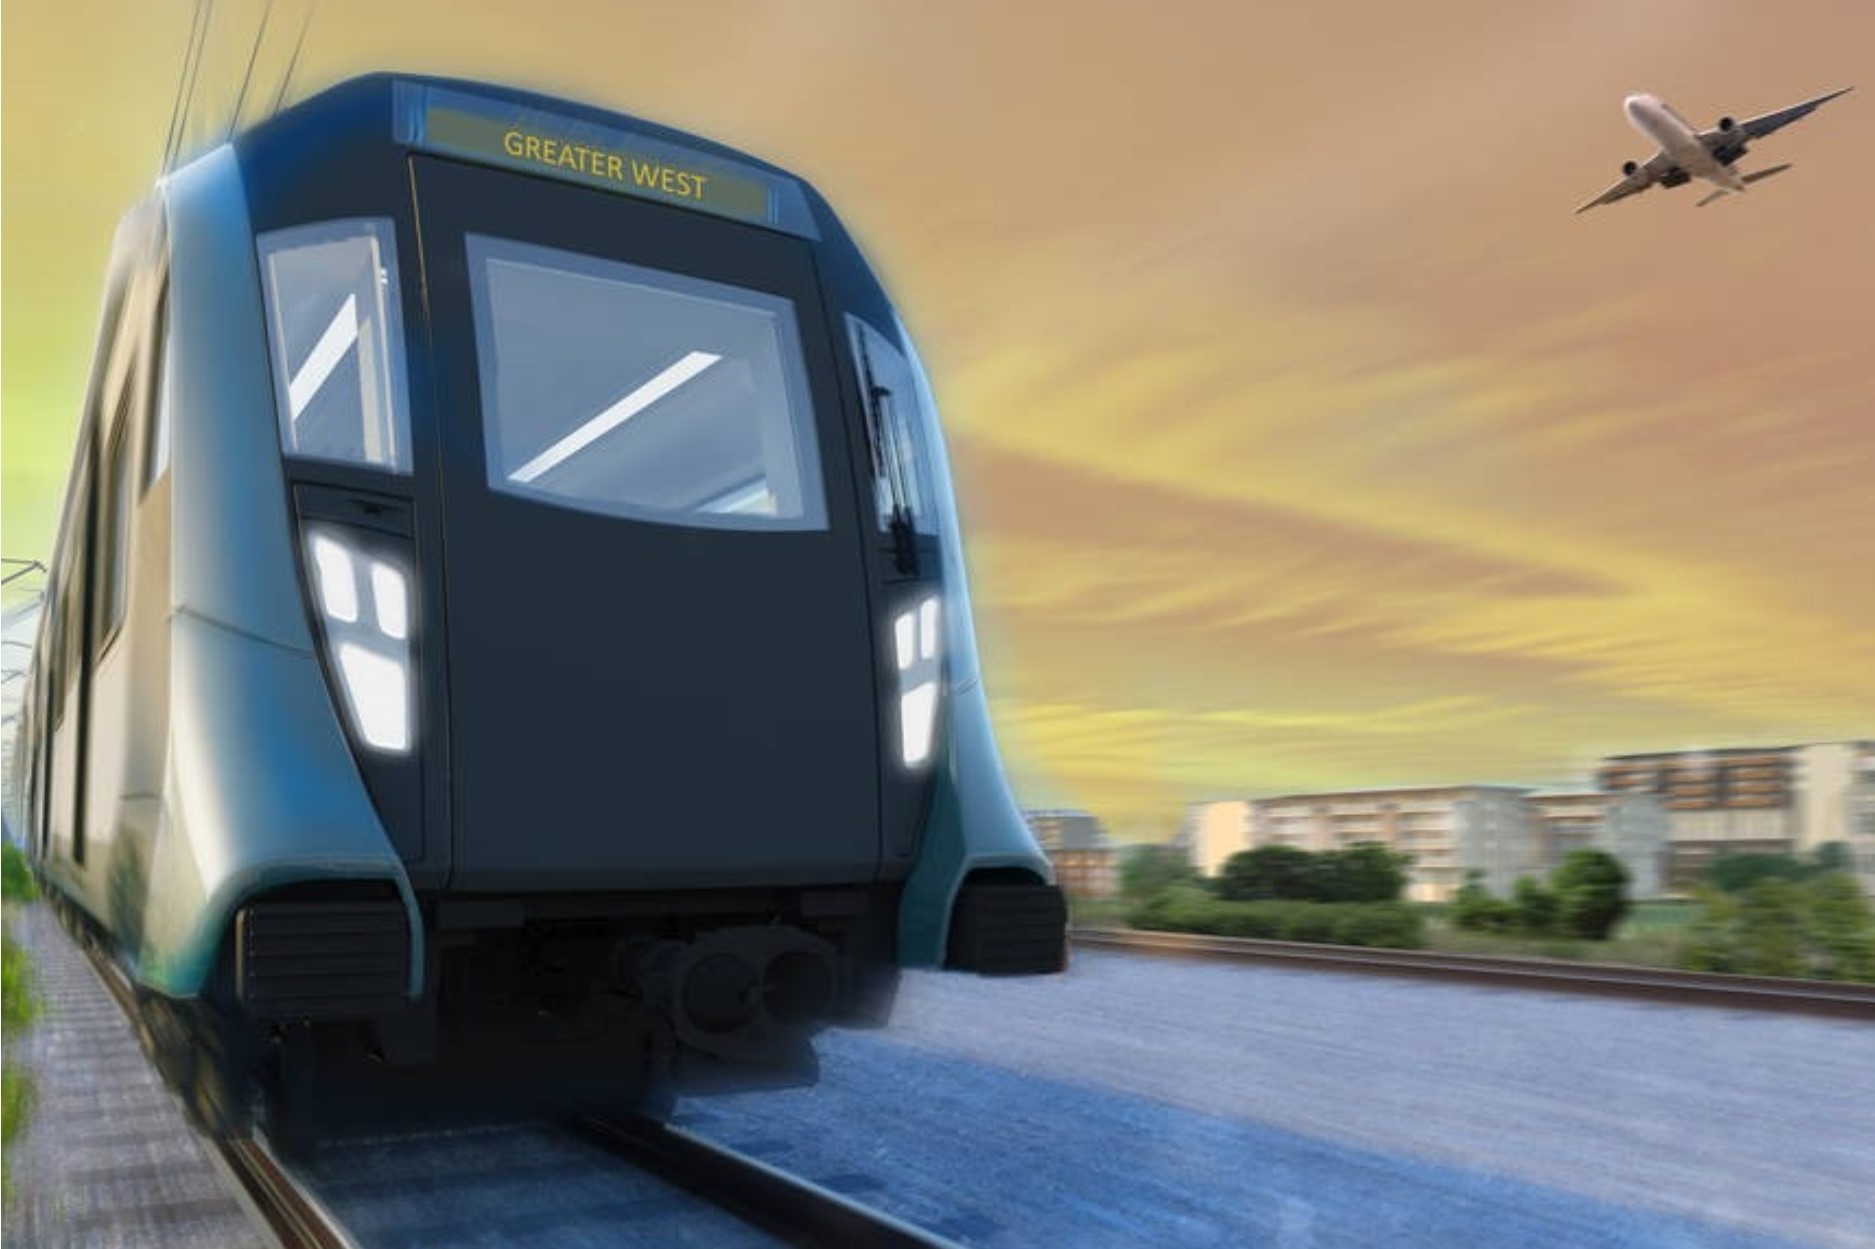 artists impression of train with aeroplane flying in distance